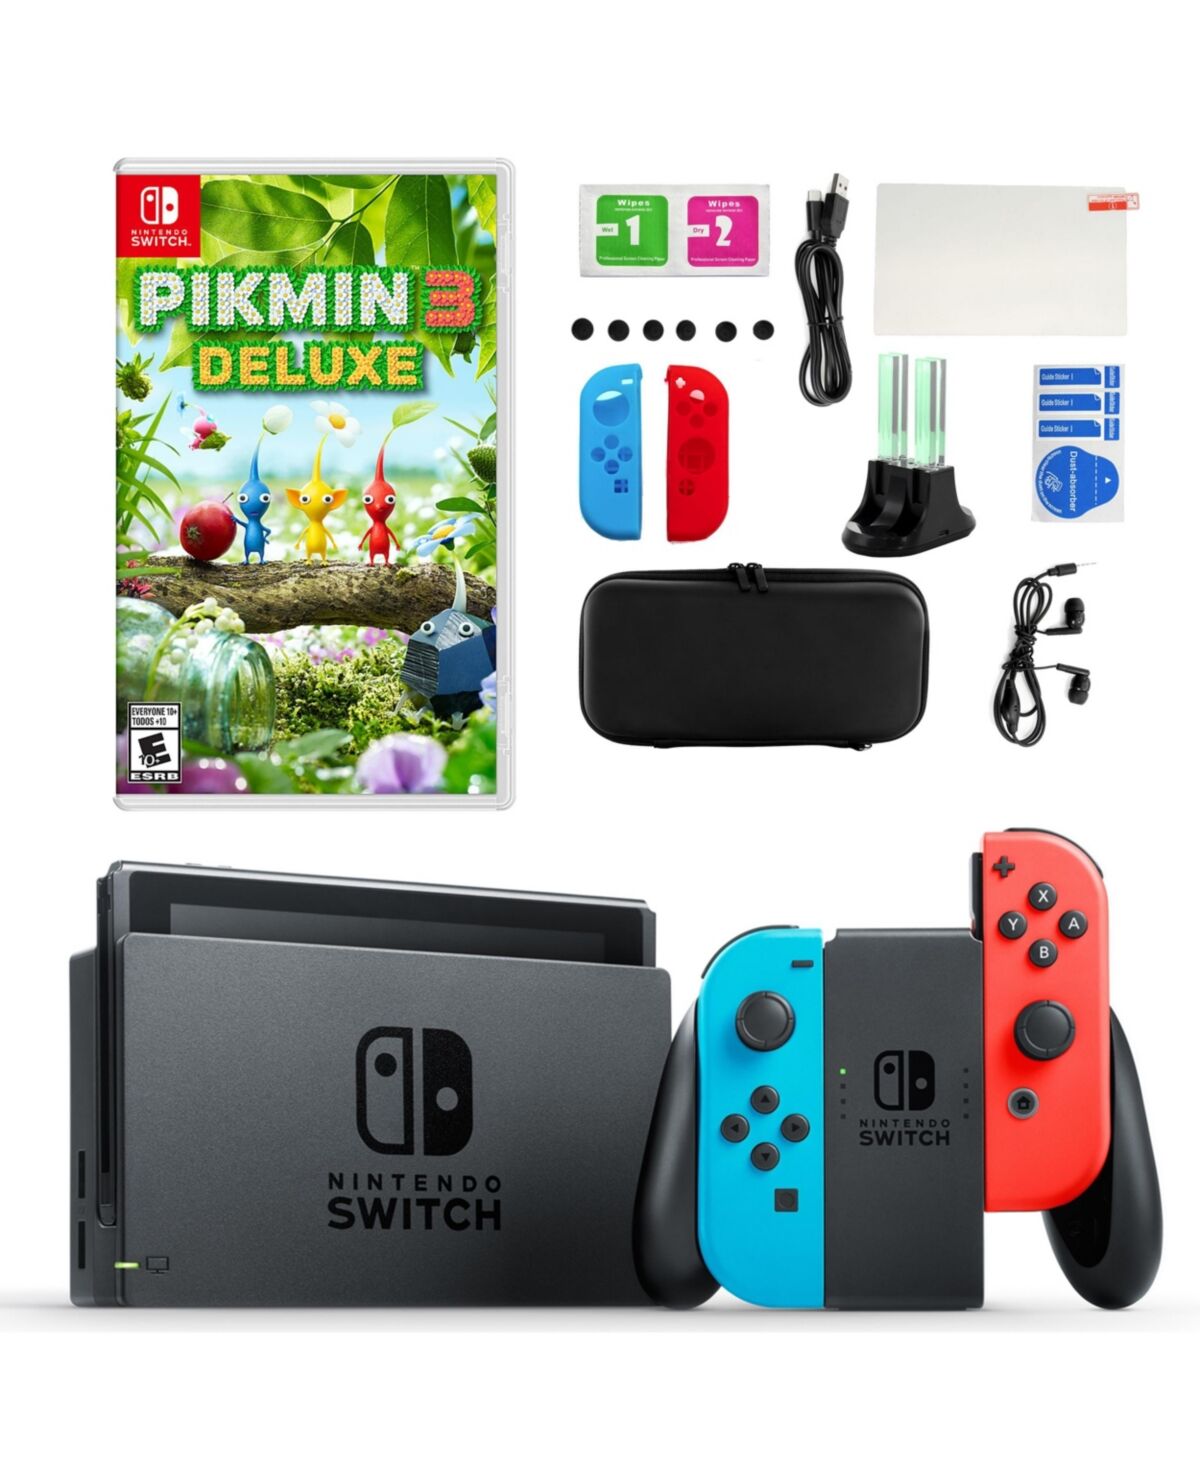 Nintendo Switch in Neon with Pikmin 3 Deluxe & Accessories - Open Miscellaneous